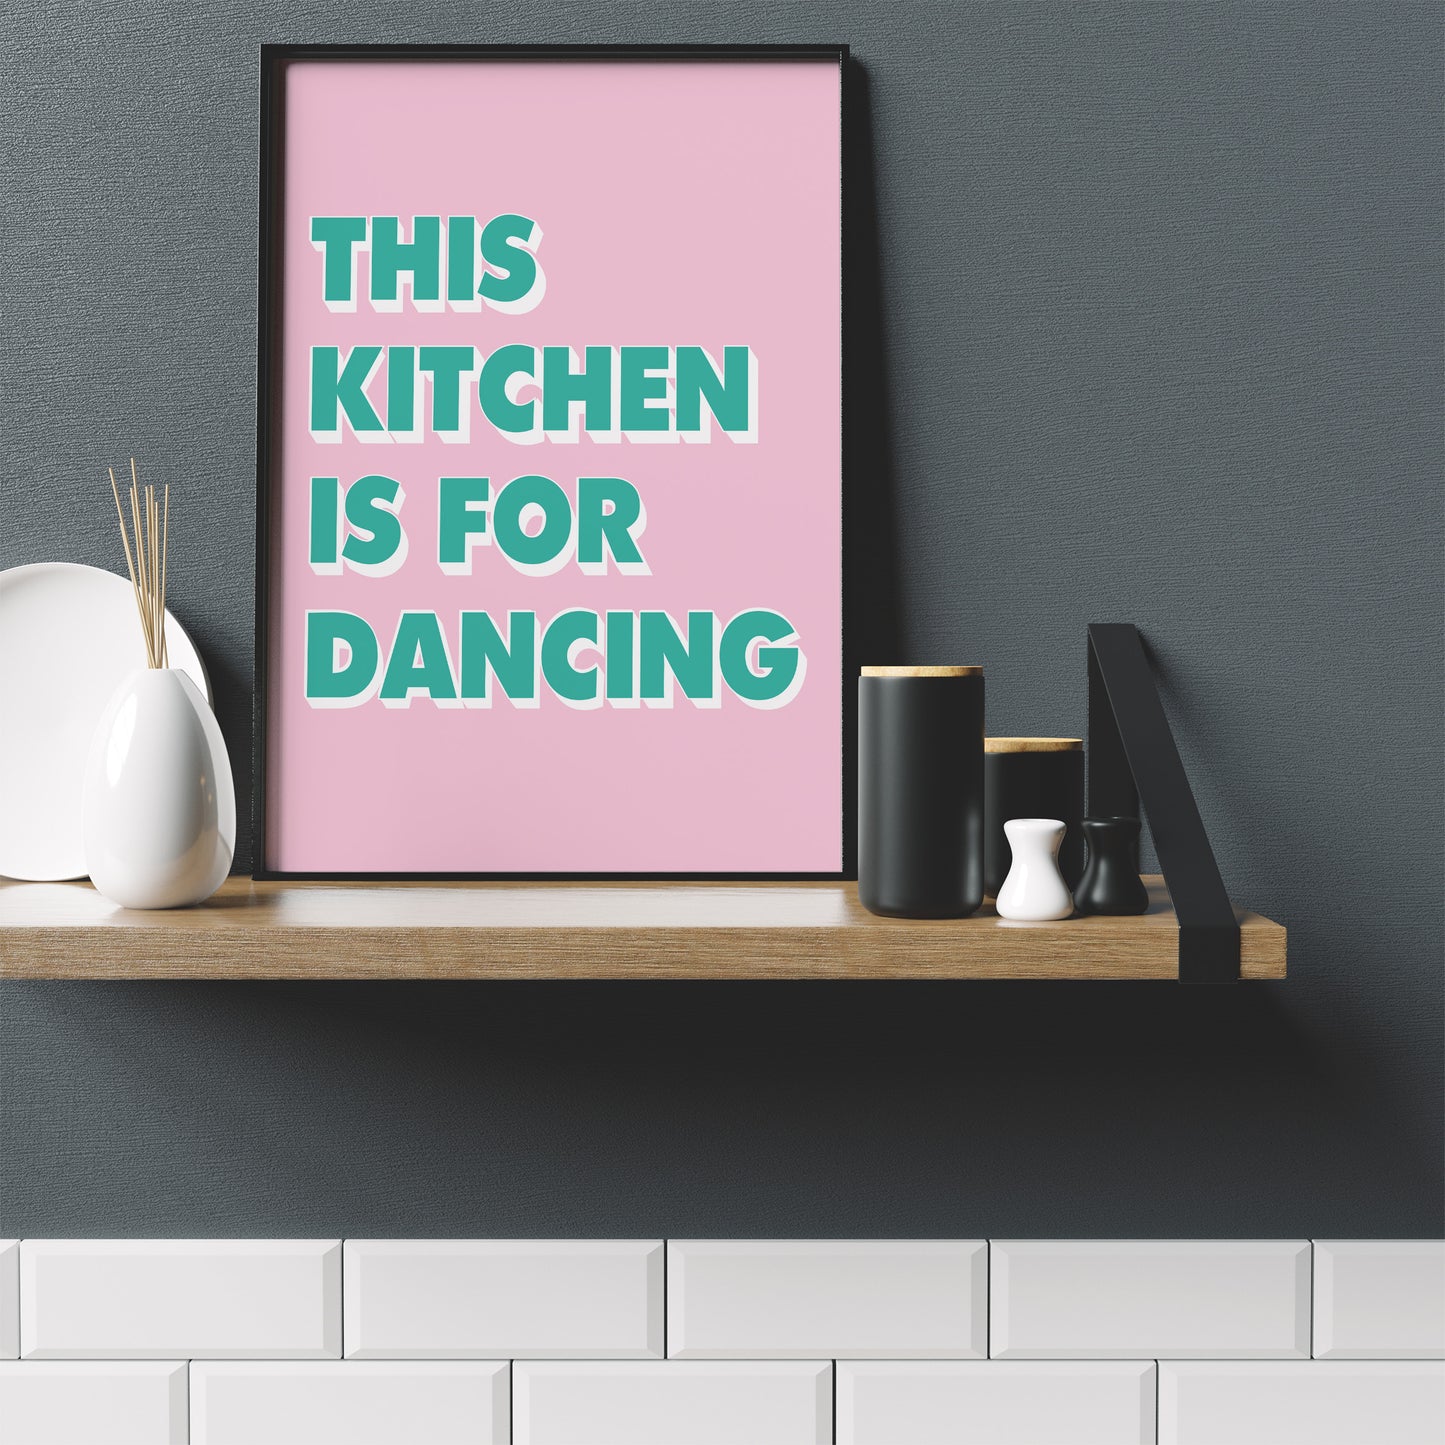 This Kitchen is For Dancing Pop Print